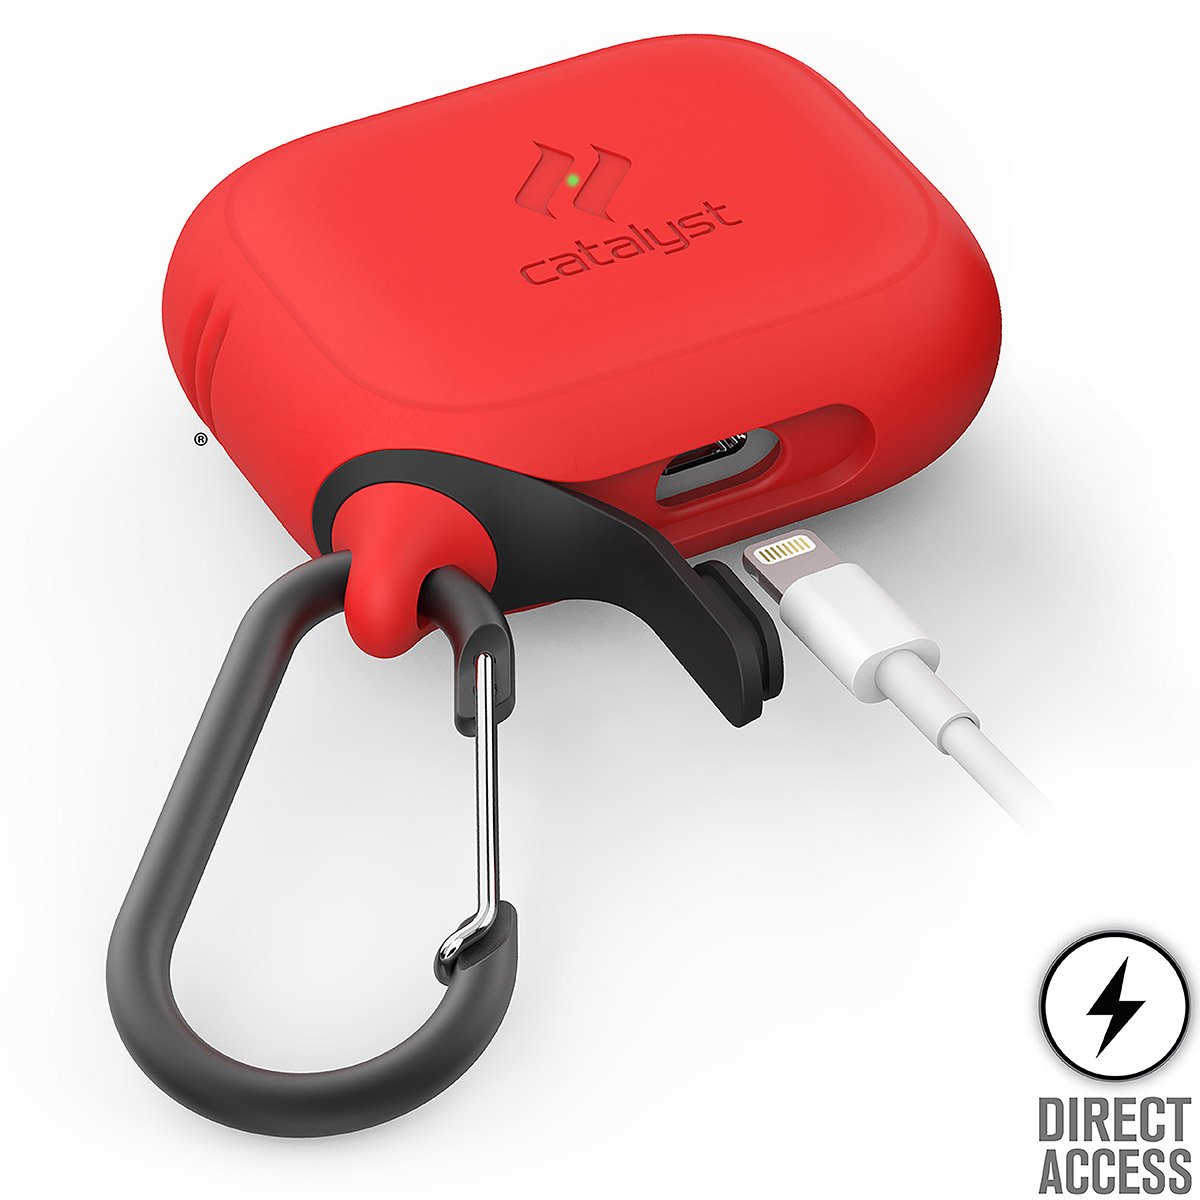 CATAPDPRORED | catalyst airpods pro gen 2 1 waterproof case carabiner flame red open charging plug text reads direct access